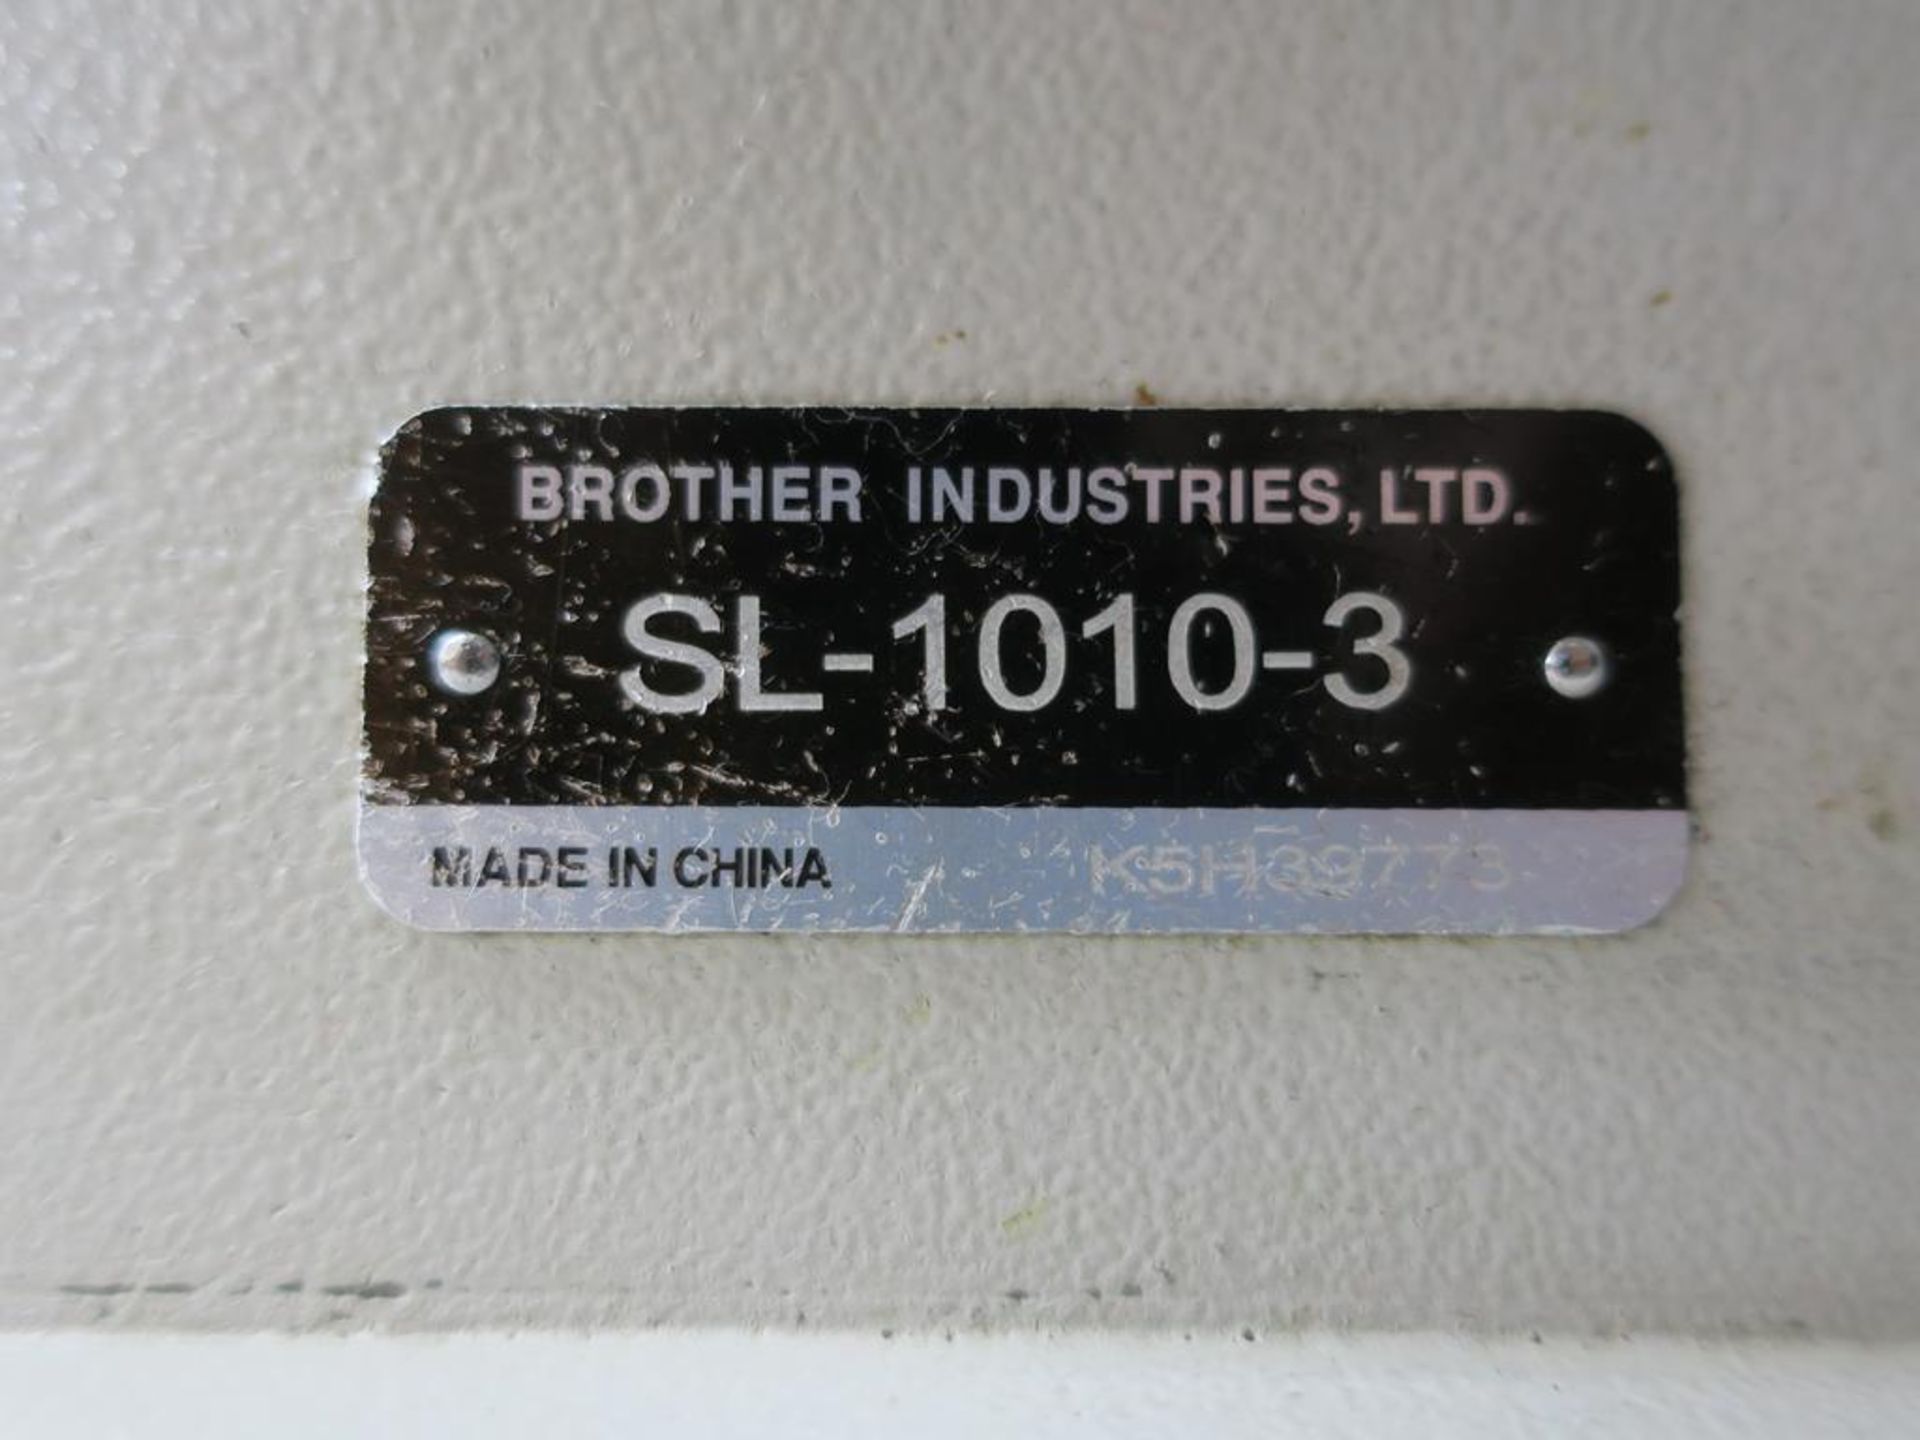 Brother Straight Stitch Industrial Sewing Machine - Image 3 of 5